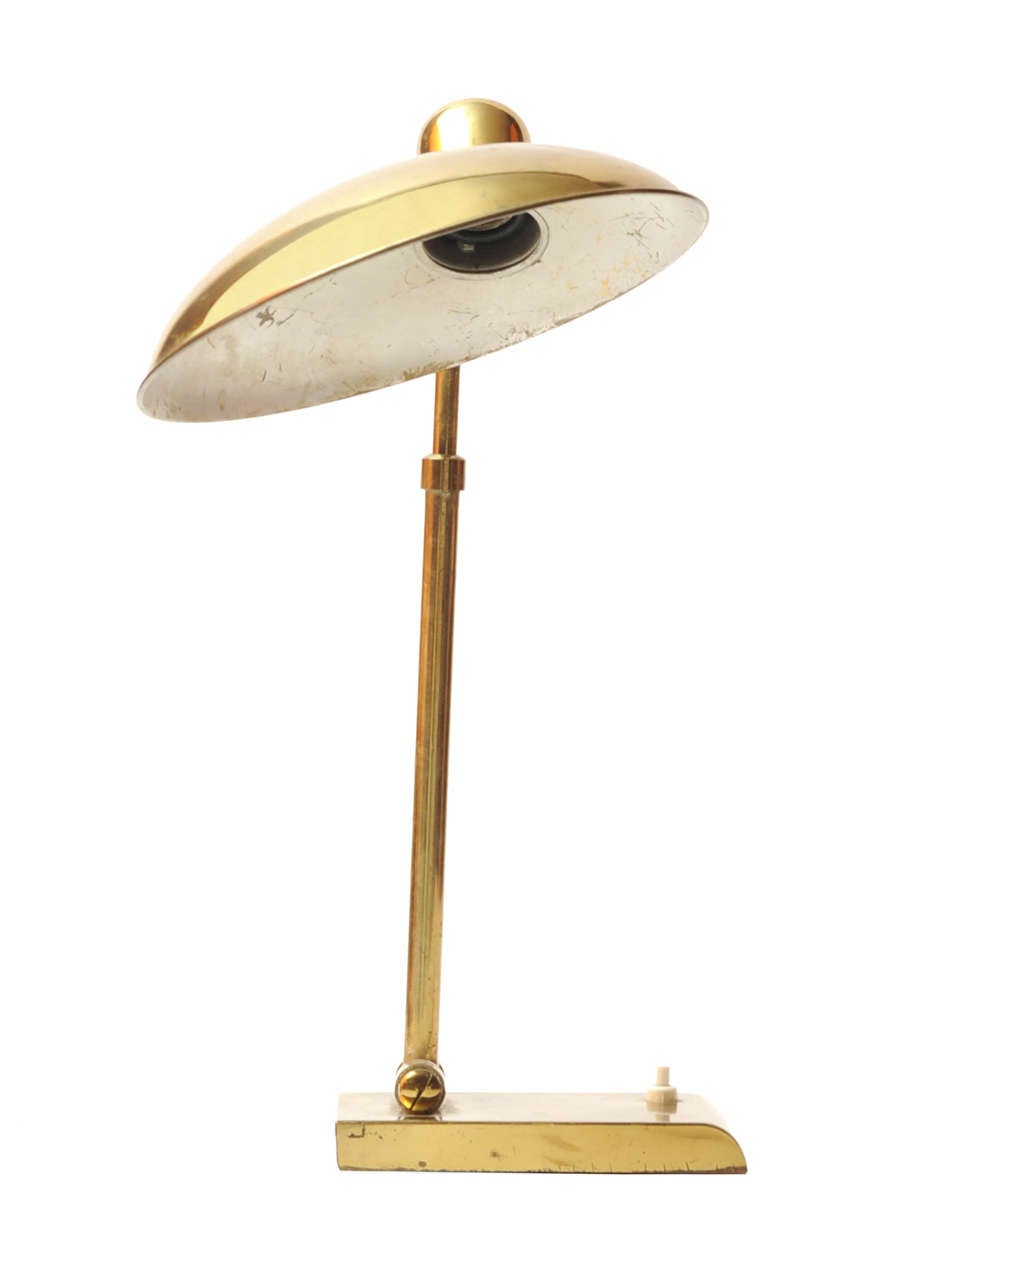 1950s adjustable desk lamp.
The height is adjustable. The lamp can reach a maximum height of 54 cm.